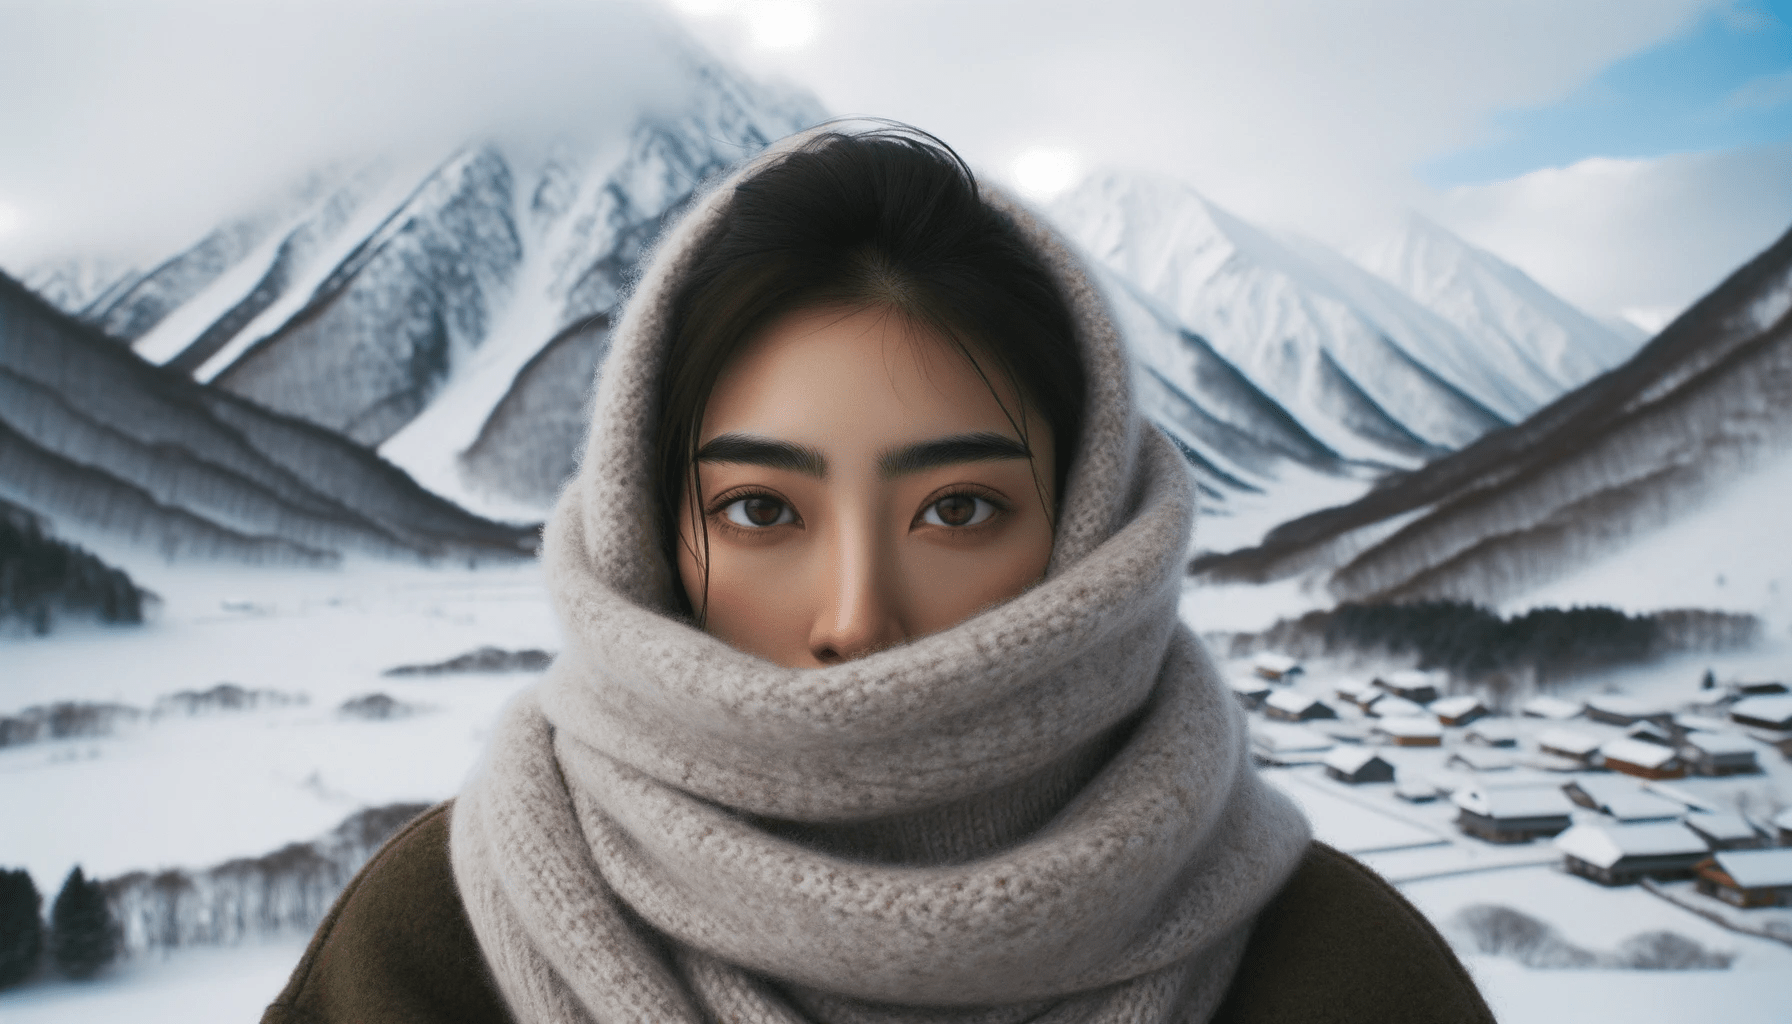 Photo of a snowy mountain backdrop. A person of East Asian descent with deep expressive eyes is wrapped in warm clothing their eyes standing out aga